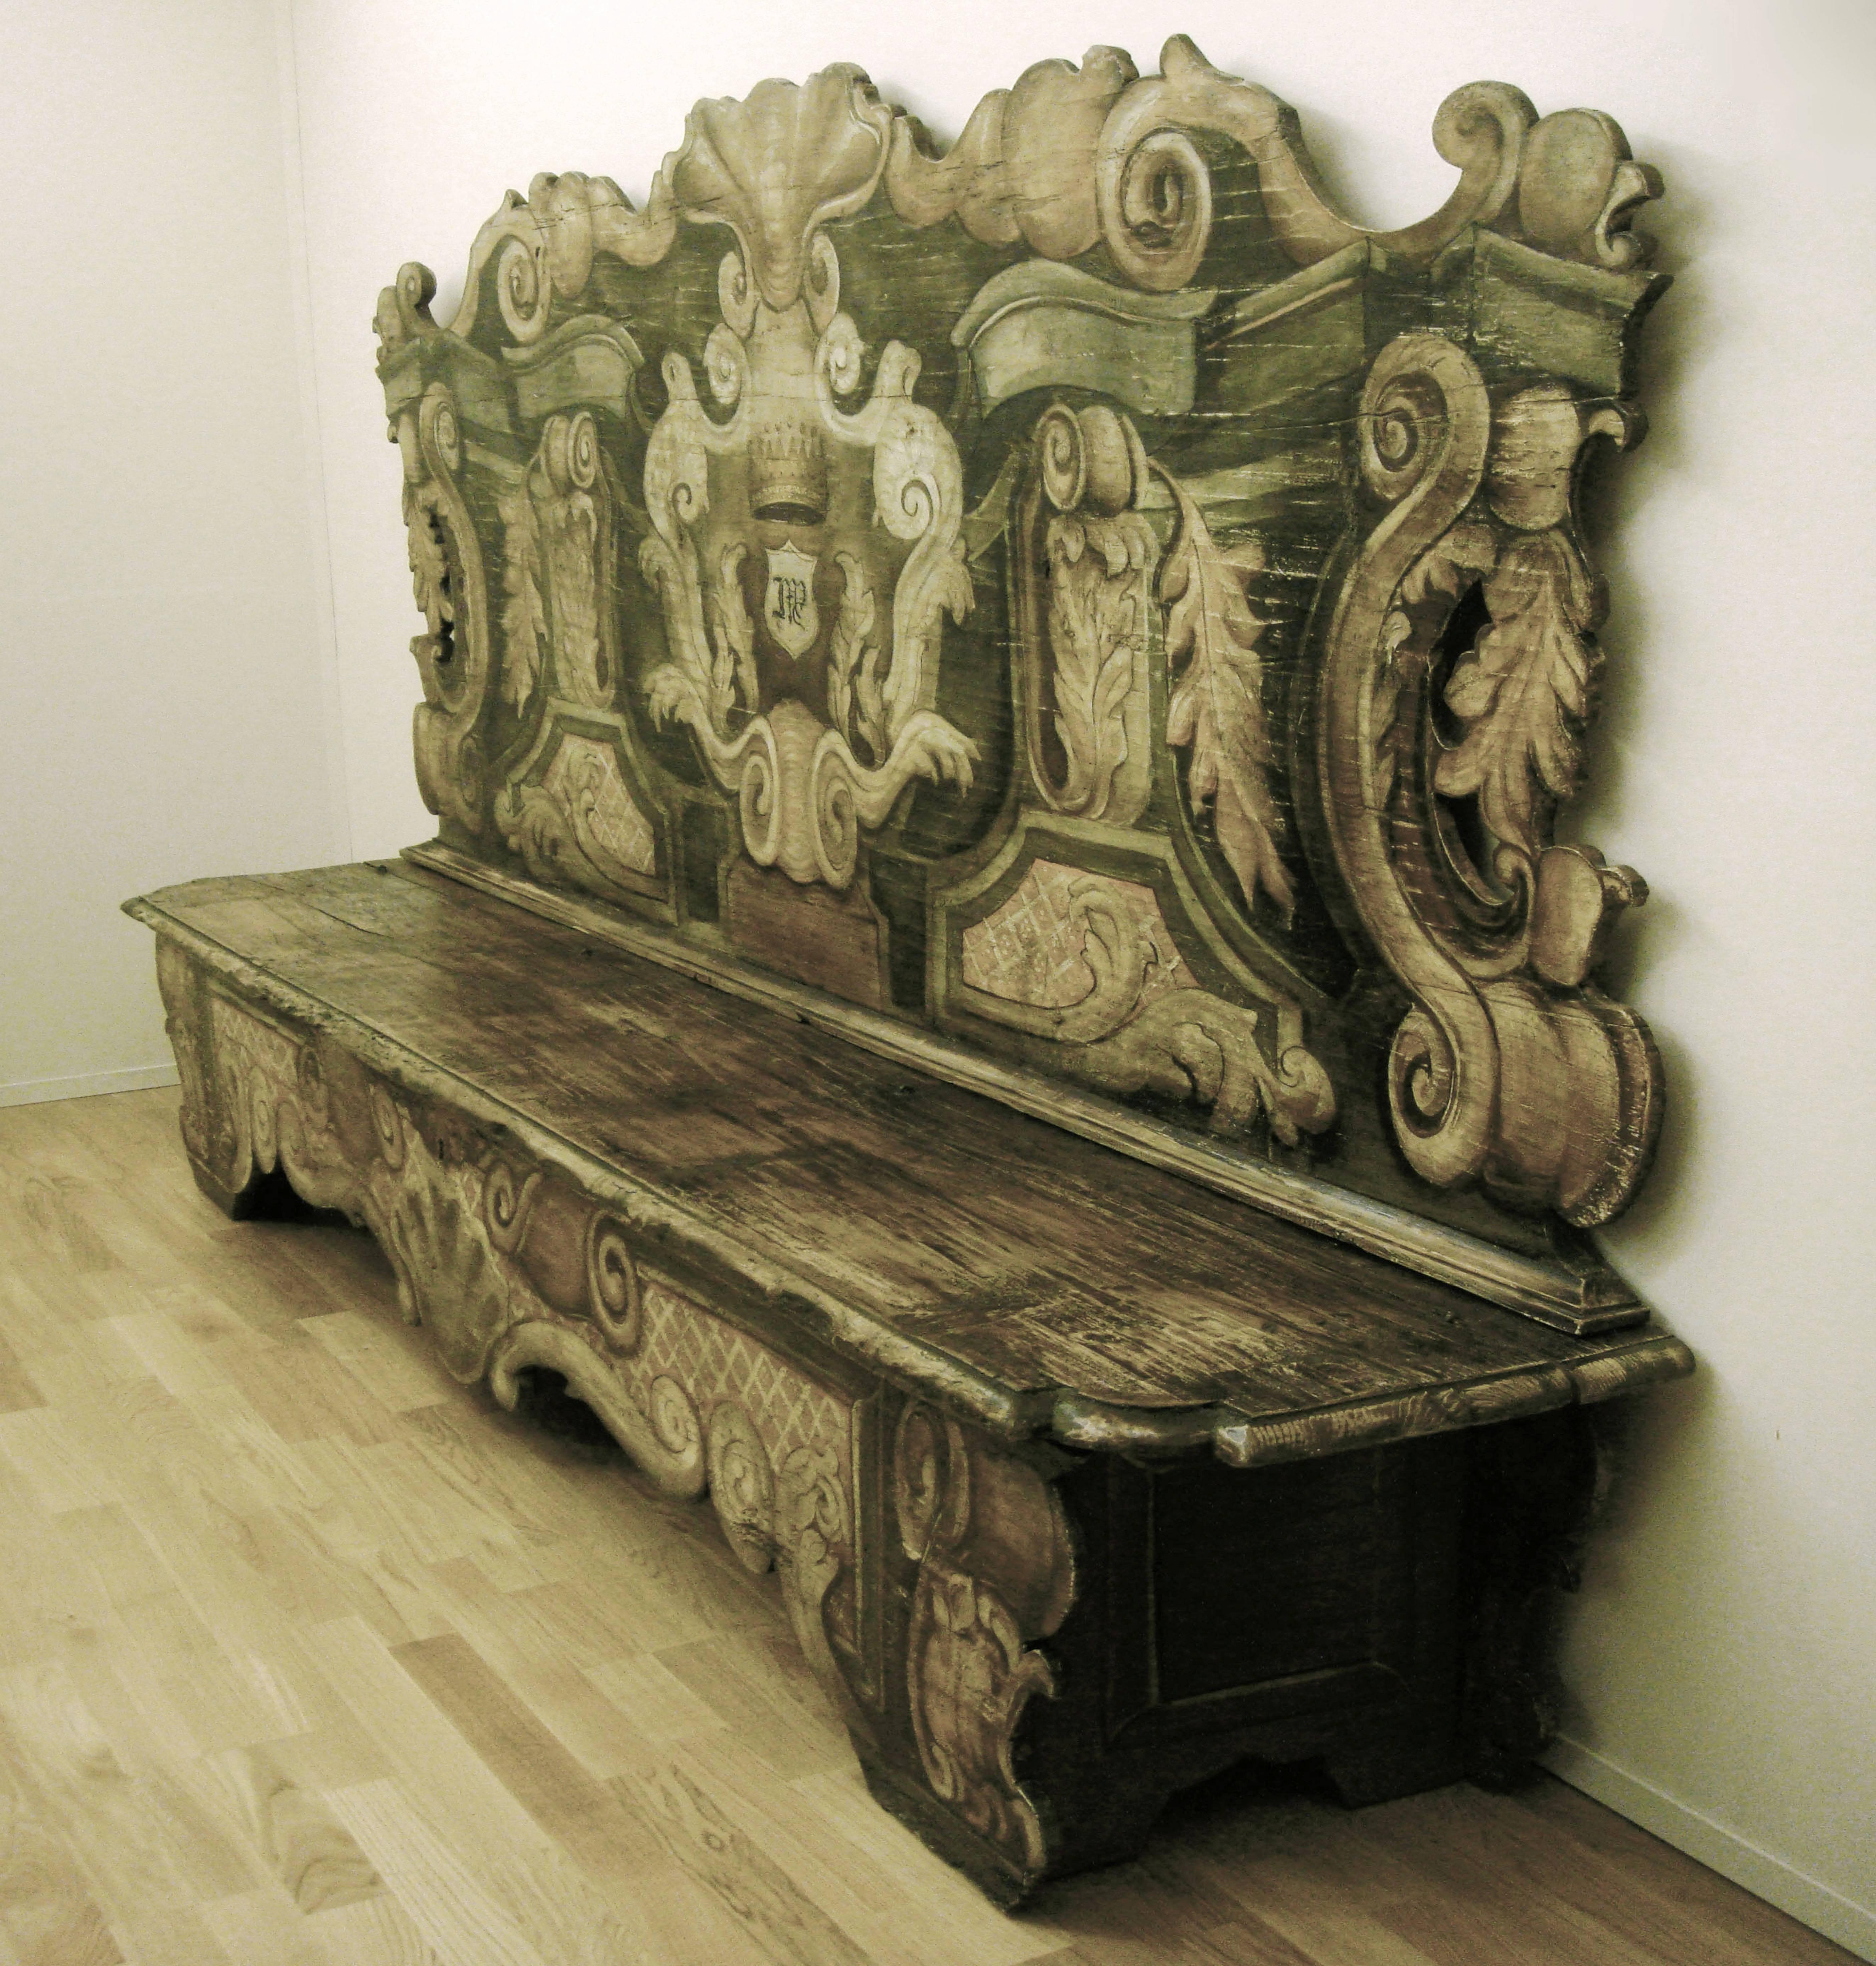 Wooden bench made up with ancient material, 18th century.